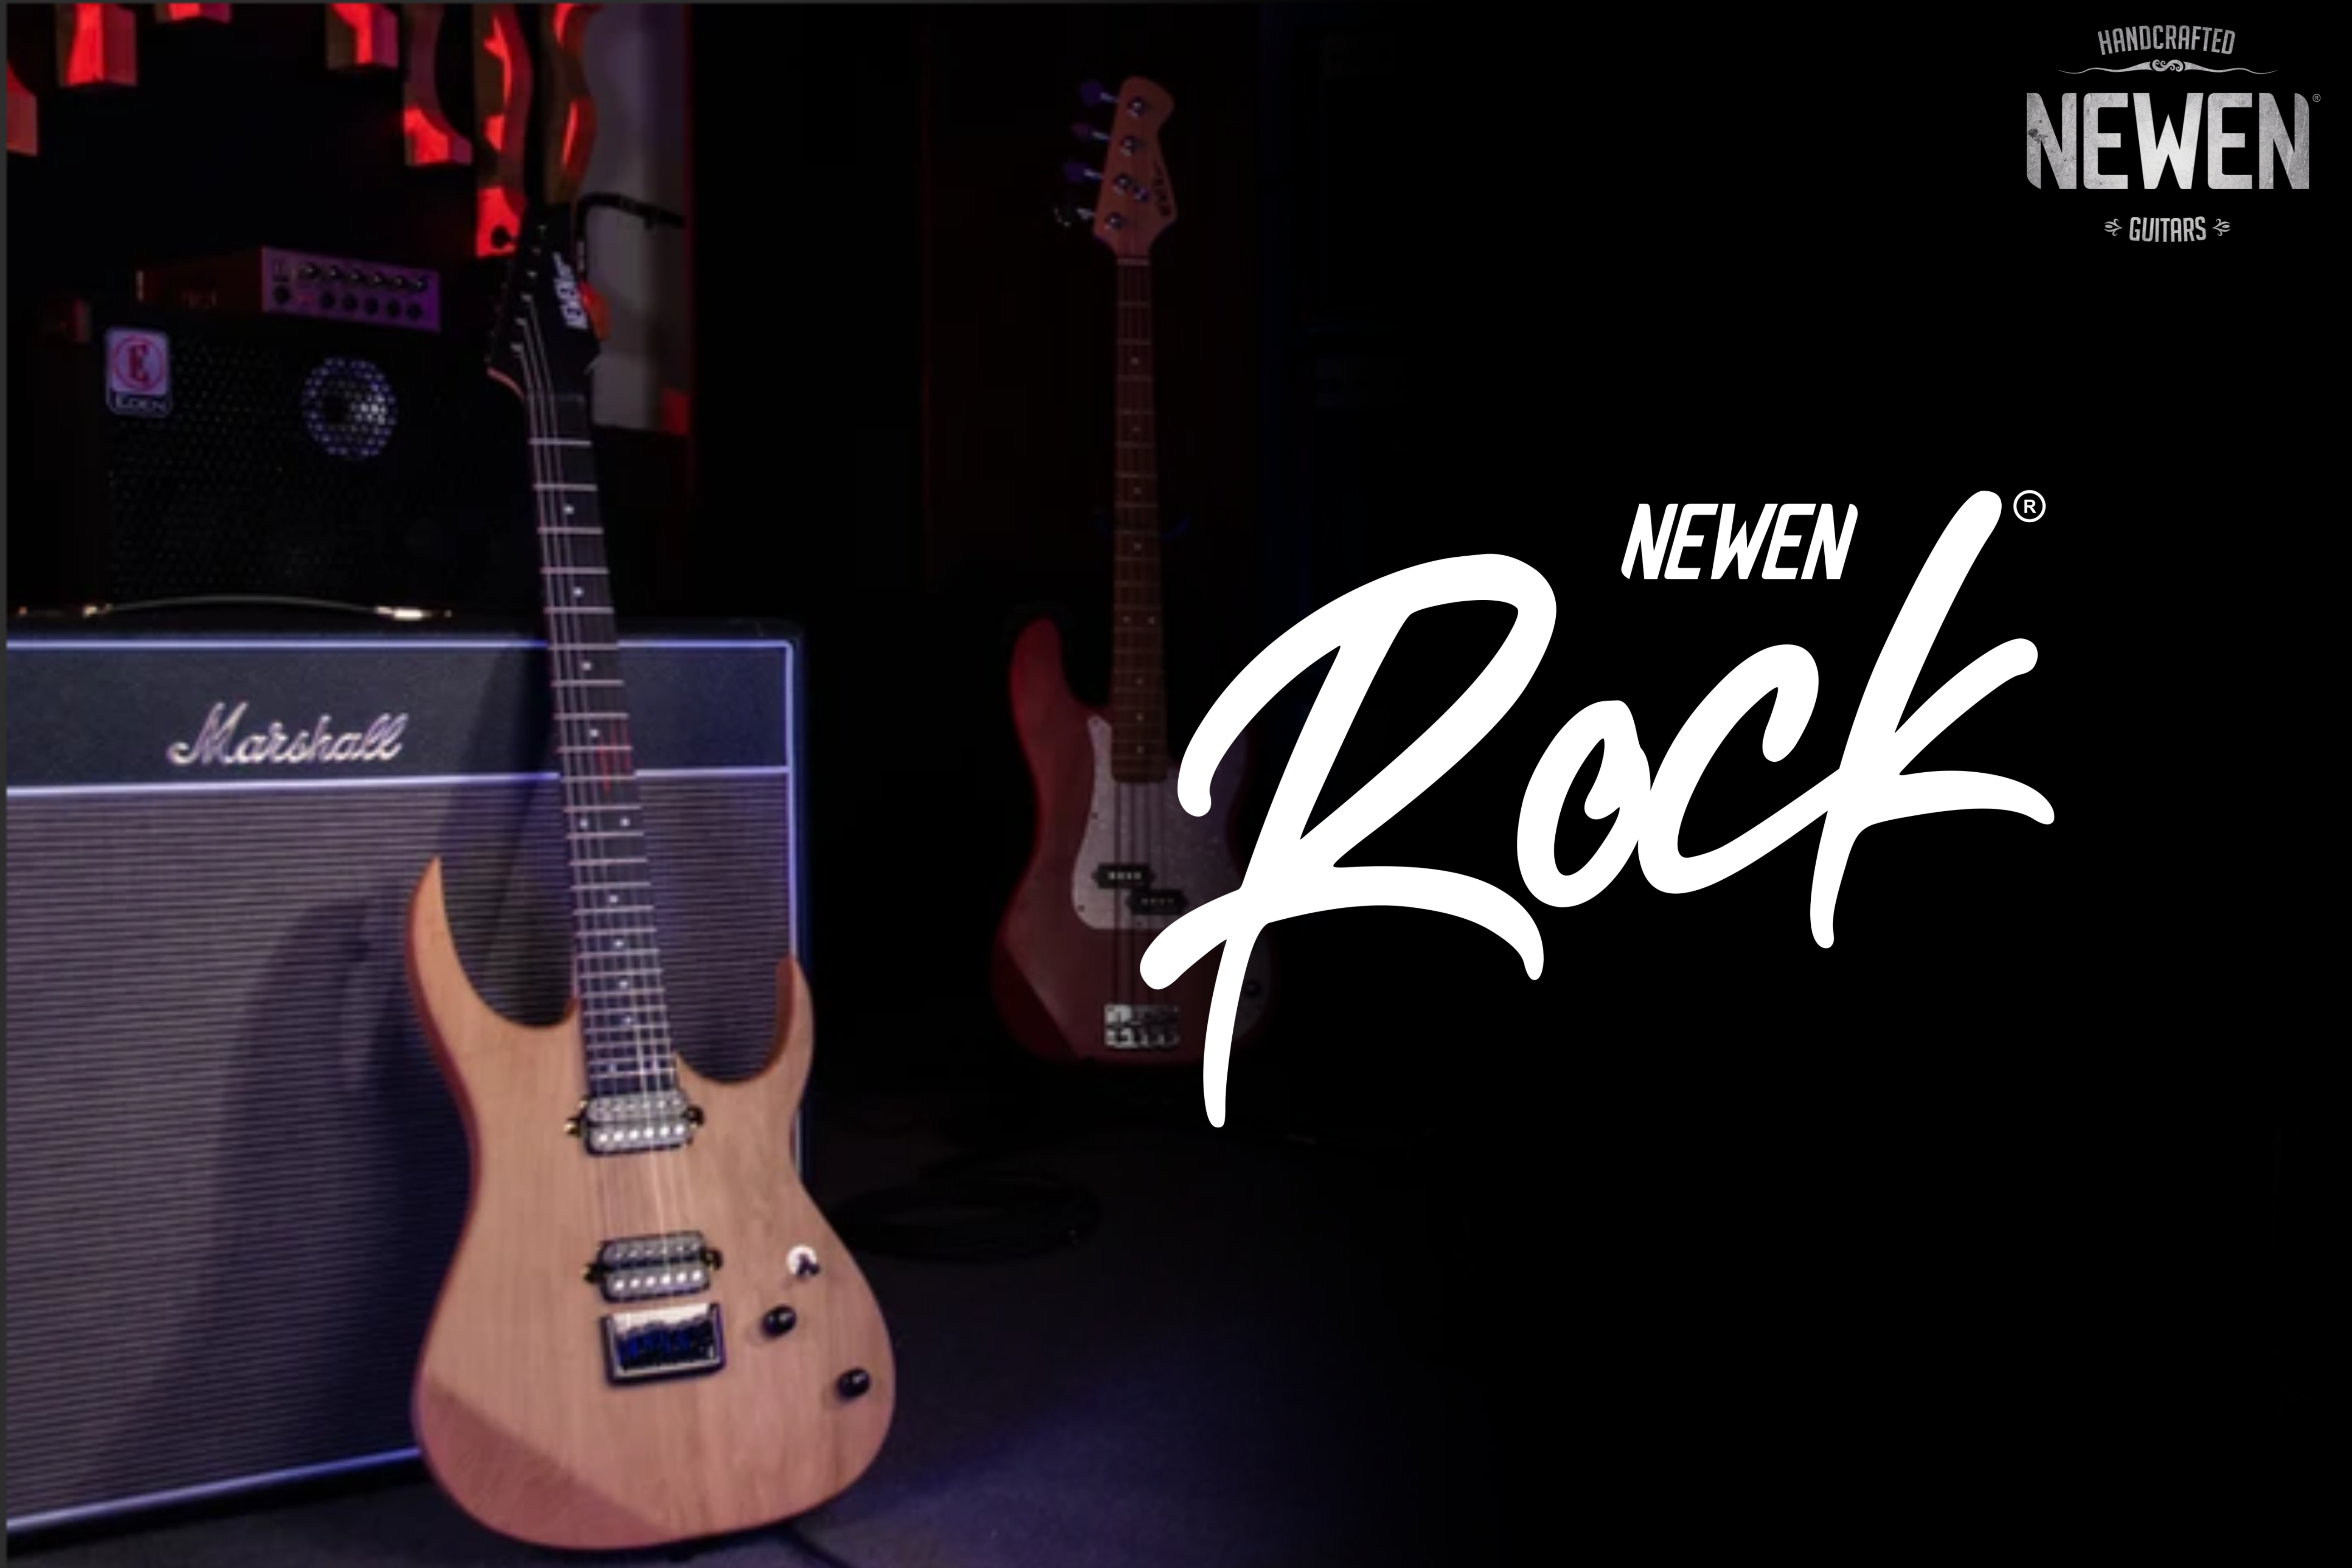 Perfect Your Sound With the Professional Newen Rock Guitar Series